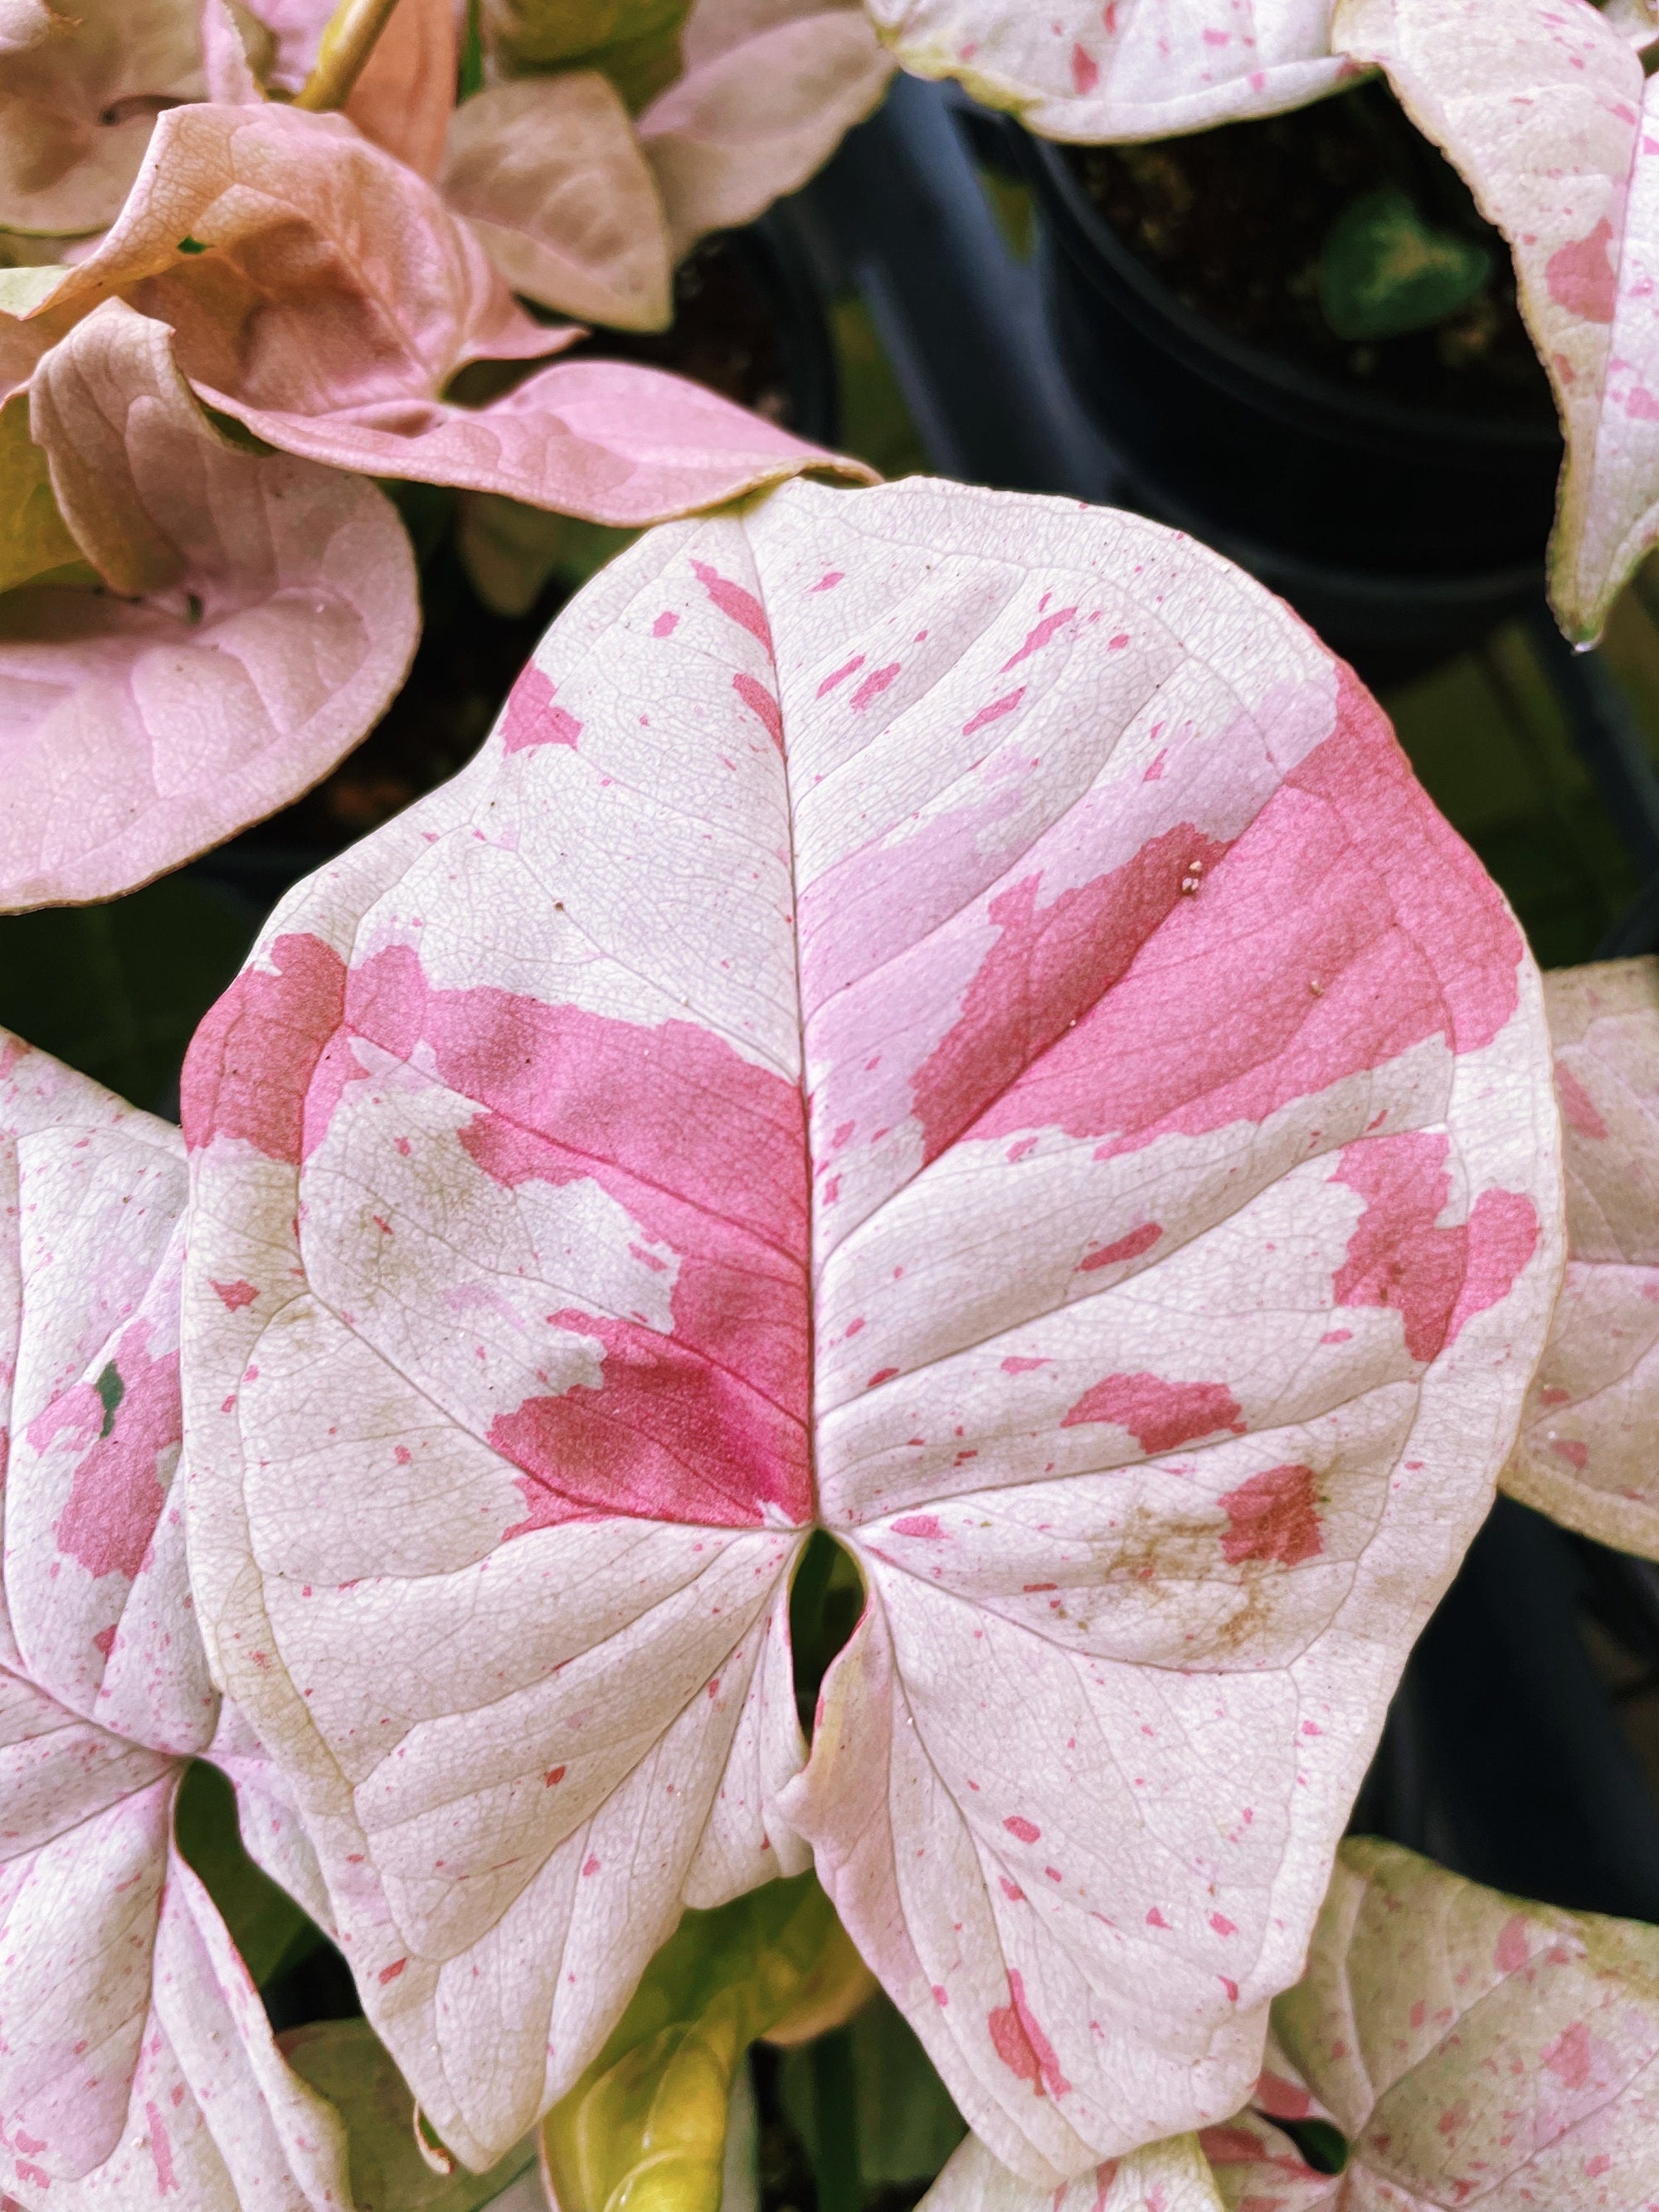 Syngonium Podophyllum Milk Confetti Tricolor Pink Variegated live 4” potted plant house aroid plant